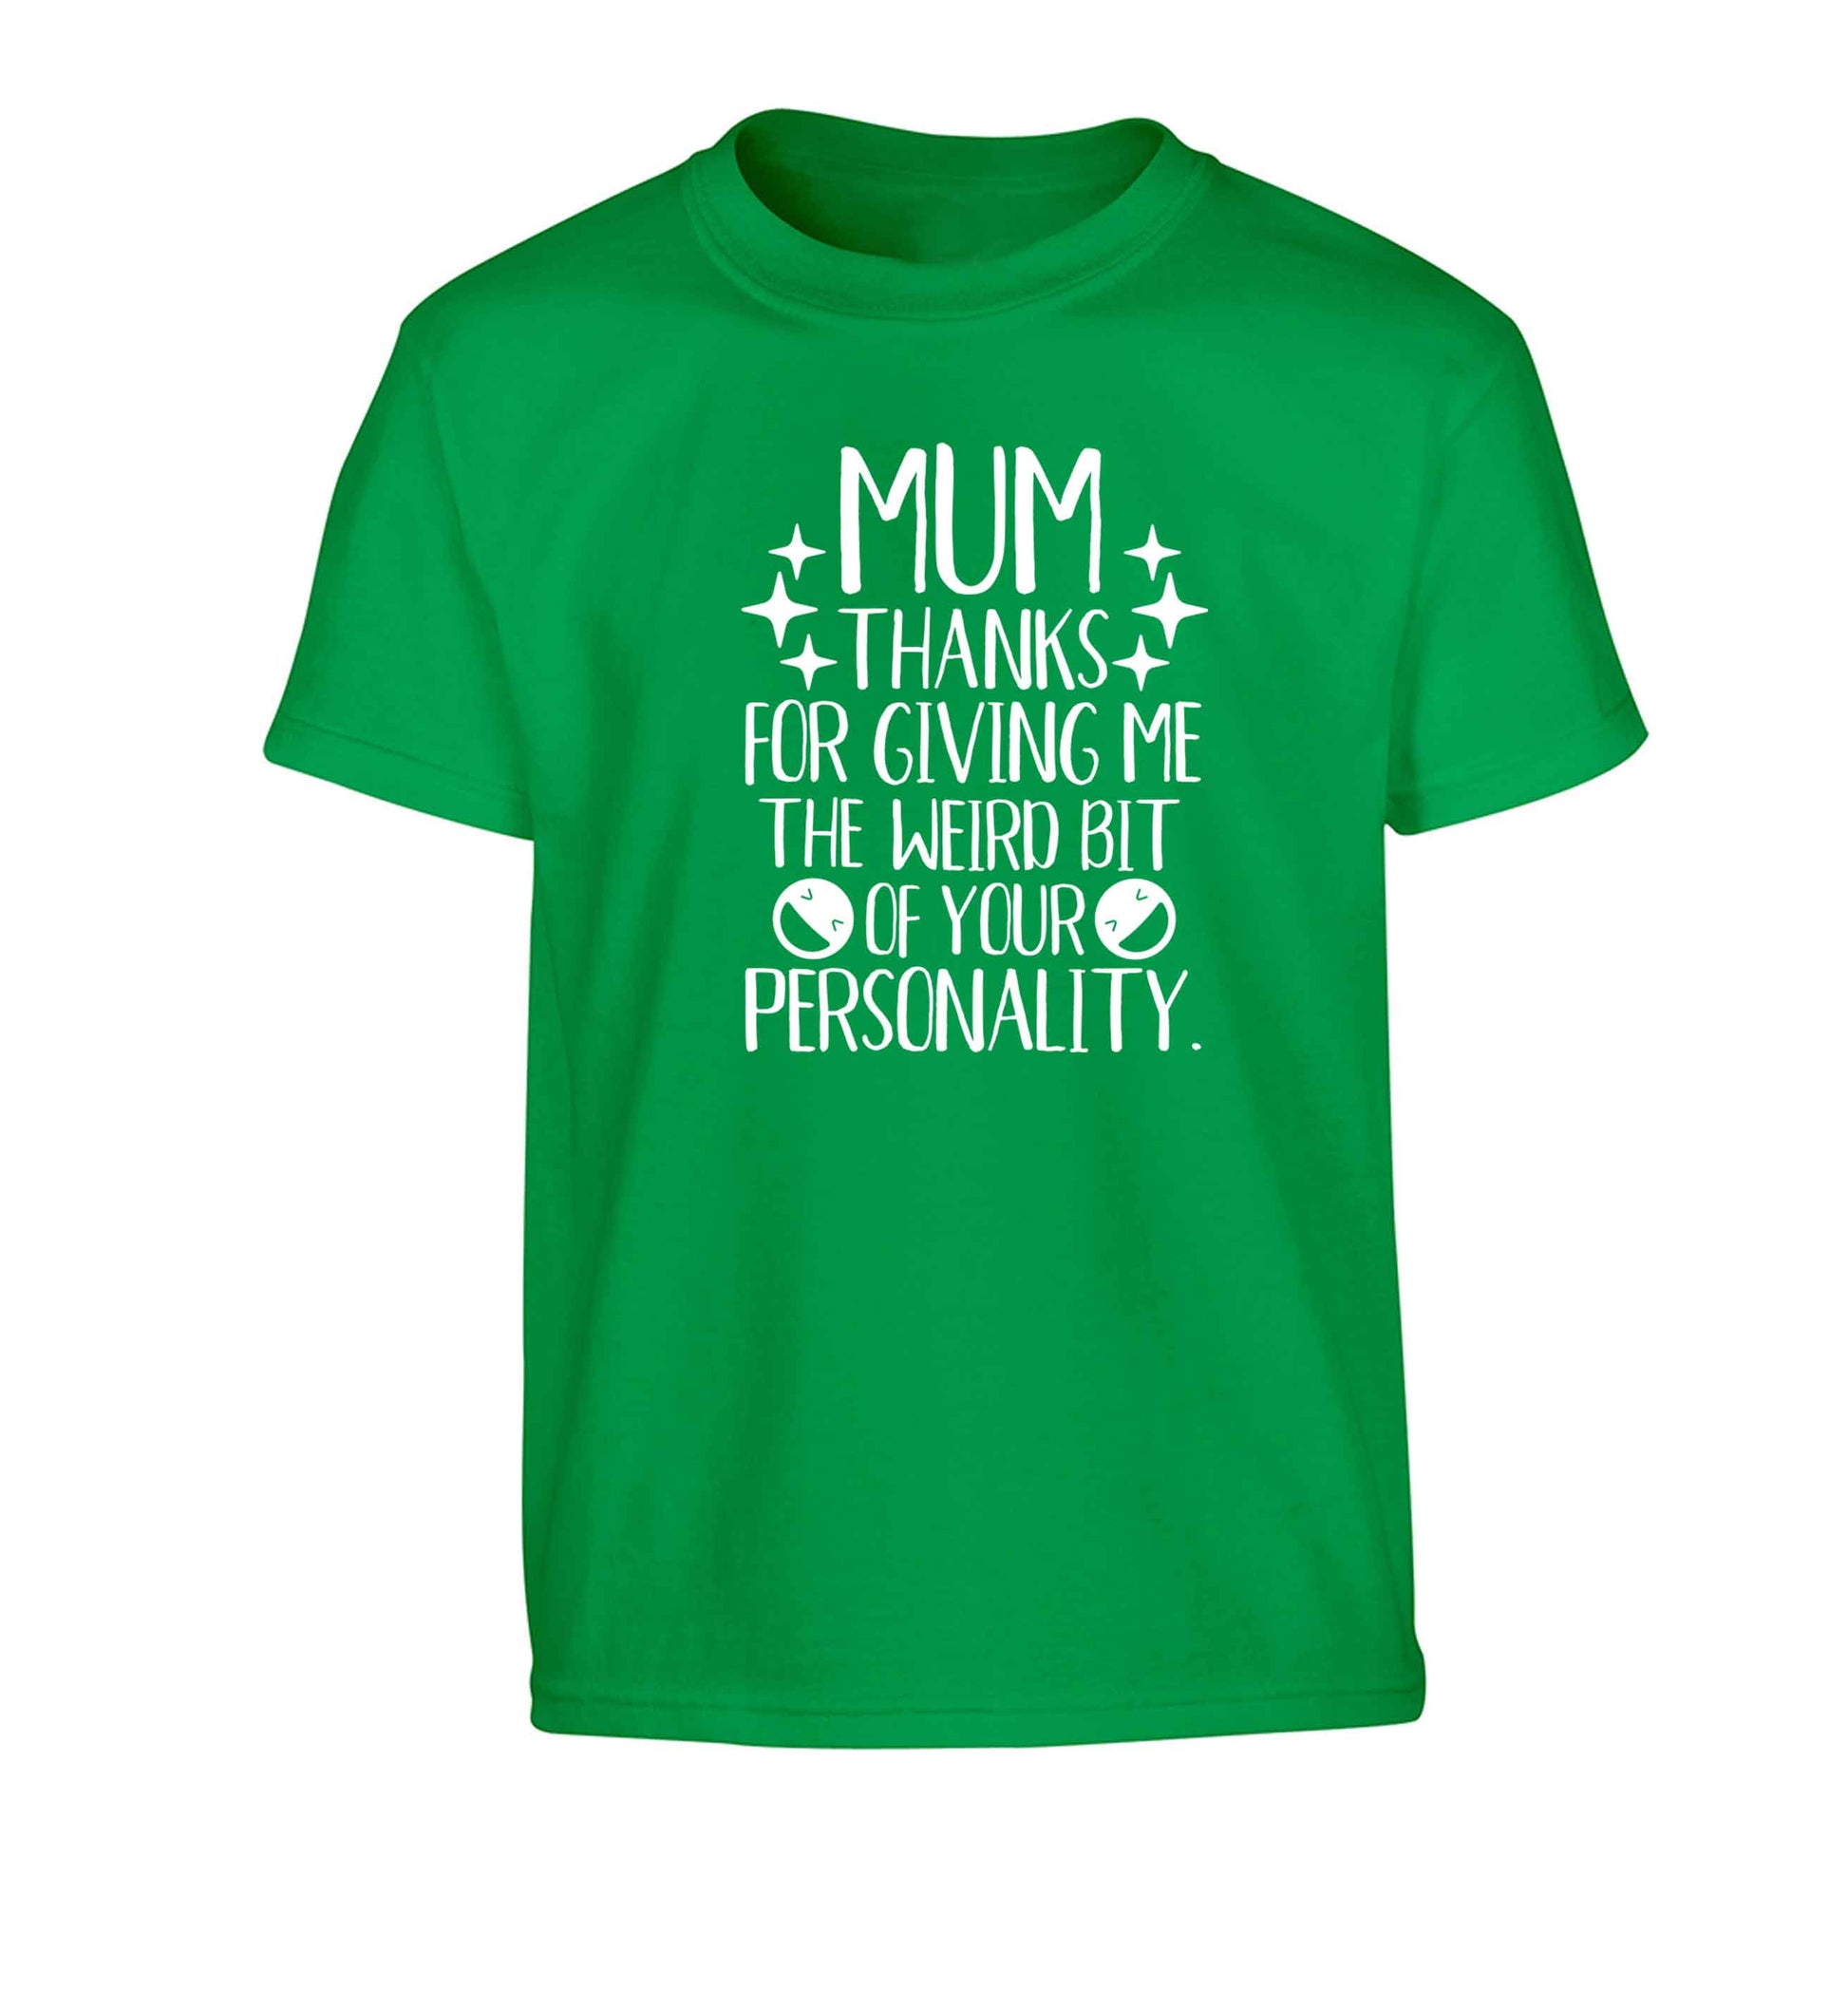 Mum thanks for giving me the weird bit of your personality Children's green Tshirt 12-13 Years